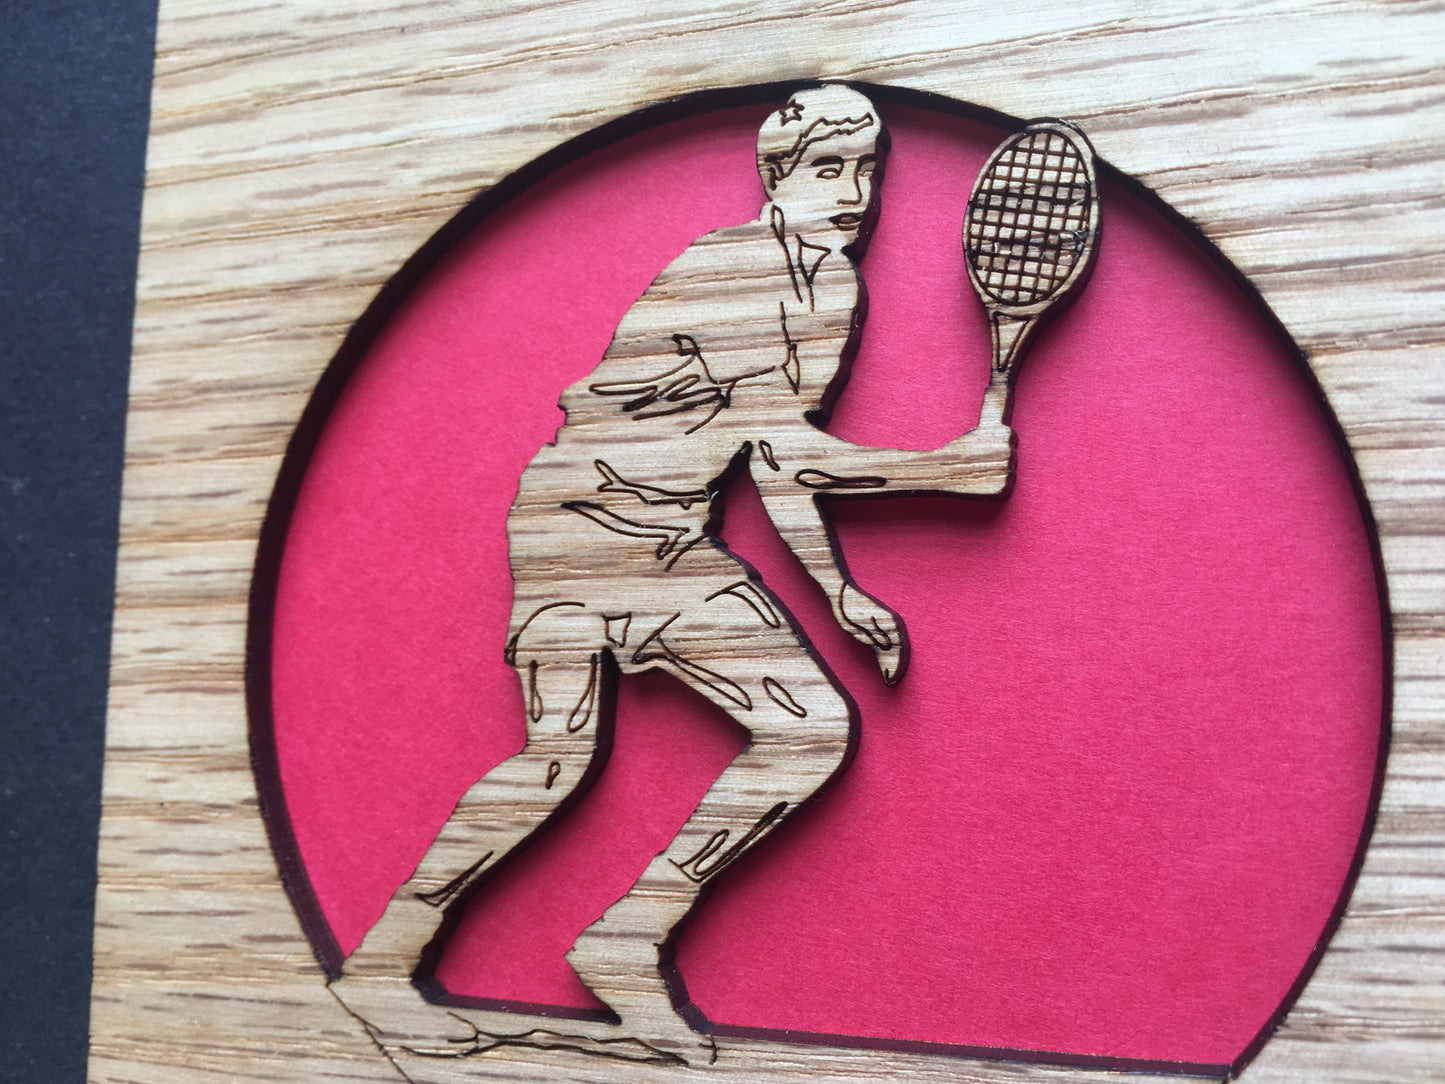 Tennis Picture Frame